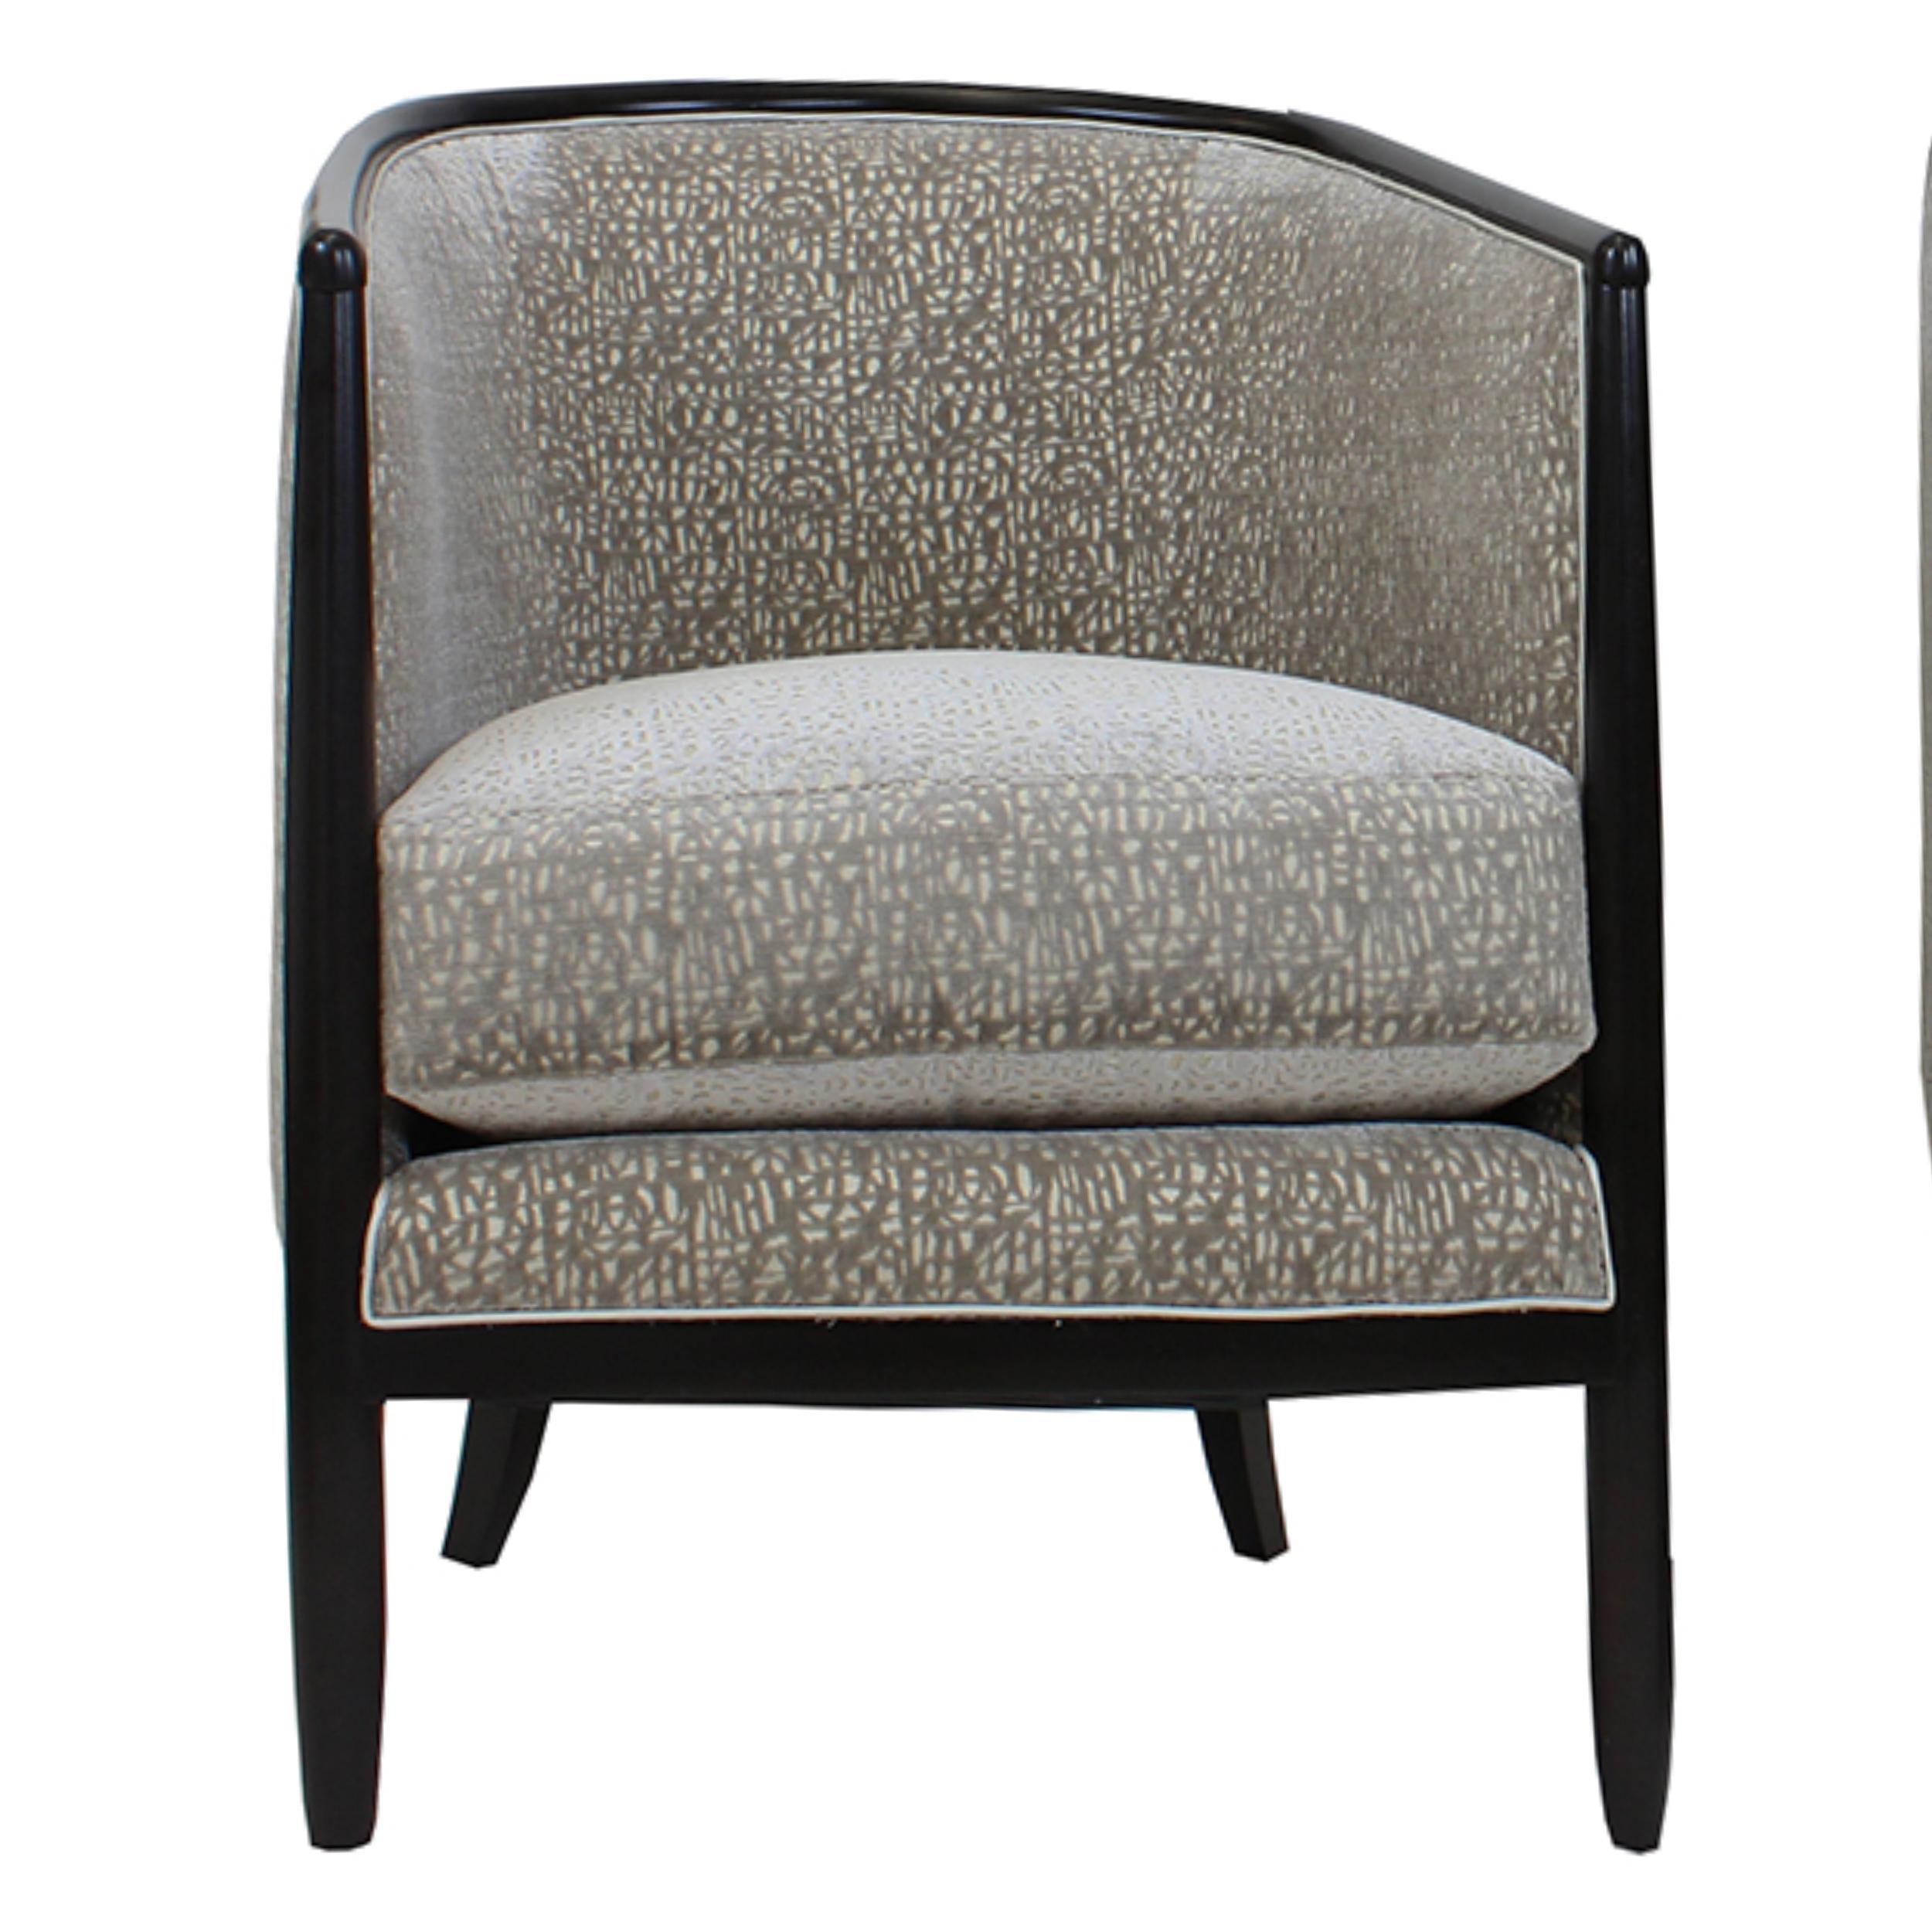 Art Deco inspired chair is made from African mahogany wood and upholstered in a soft cut velvet. Tight back barrel shape makes for a cozy chair that is luxurious and chic. Loose seat cushion is a comfortable feather/down wrapped foam and sits atop a